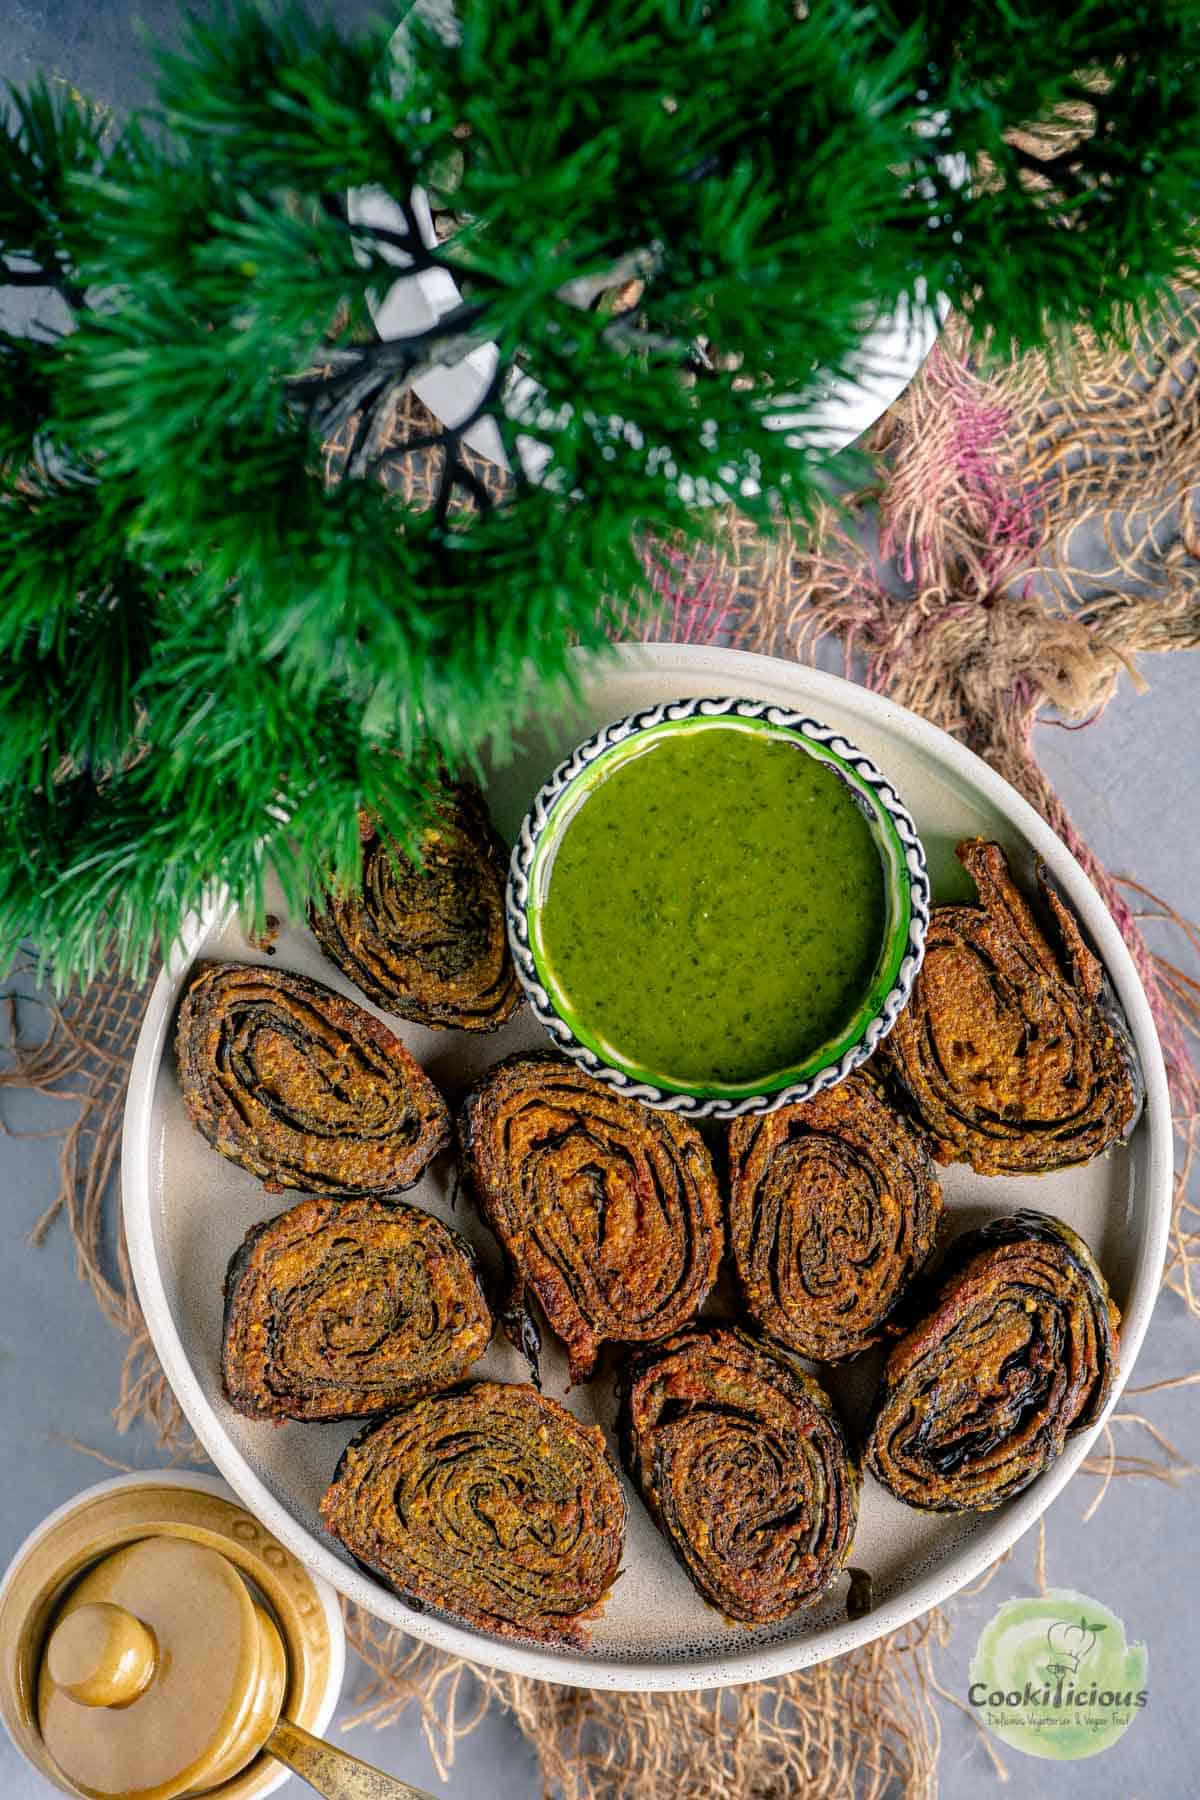 Colocasia spirals served in a platter with green chutney